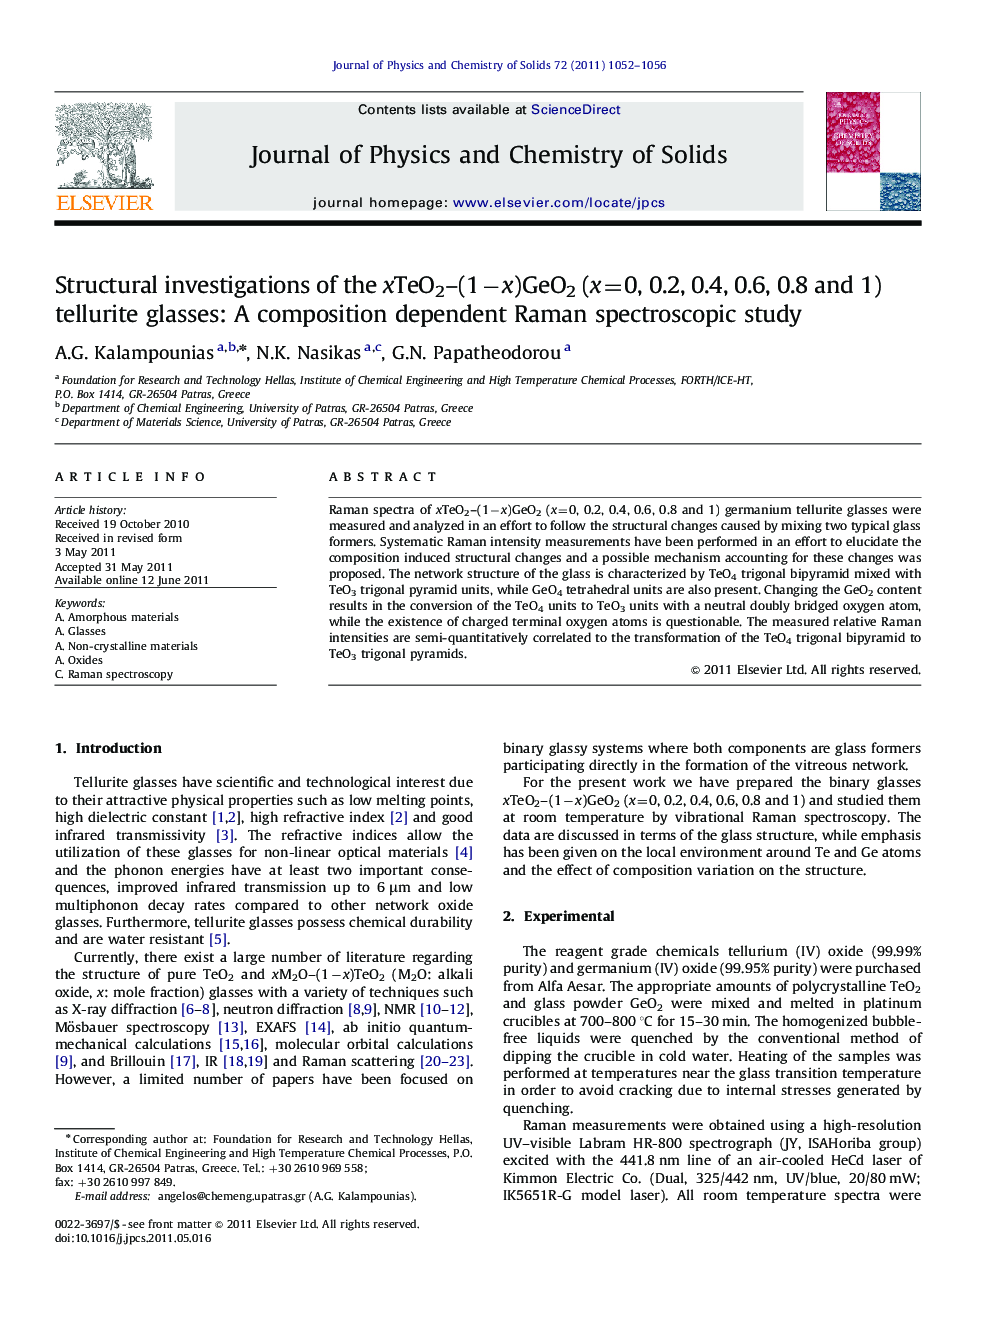 Structural investigations of the xTeO2–(1−x)GeO2 (x=0, 0.2, 0.4, 0.6, 0.8 and 1) tellurite glasses: A composition dependent Raman spectroscopic study